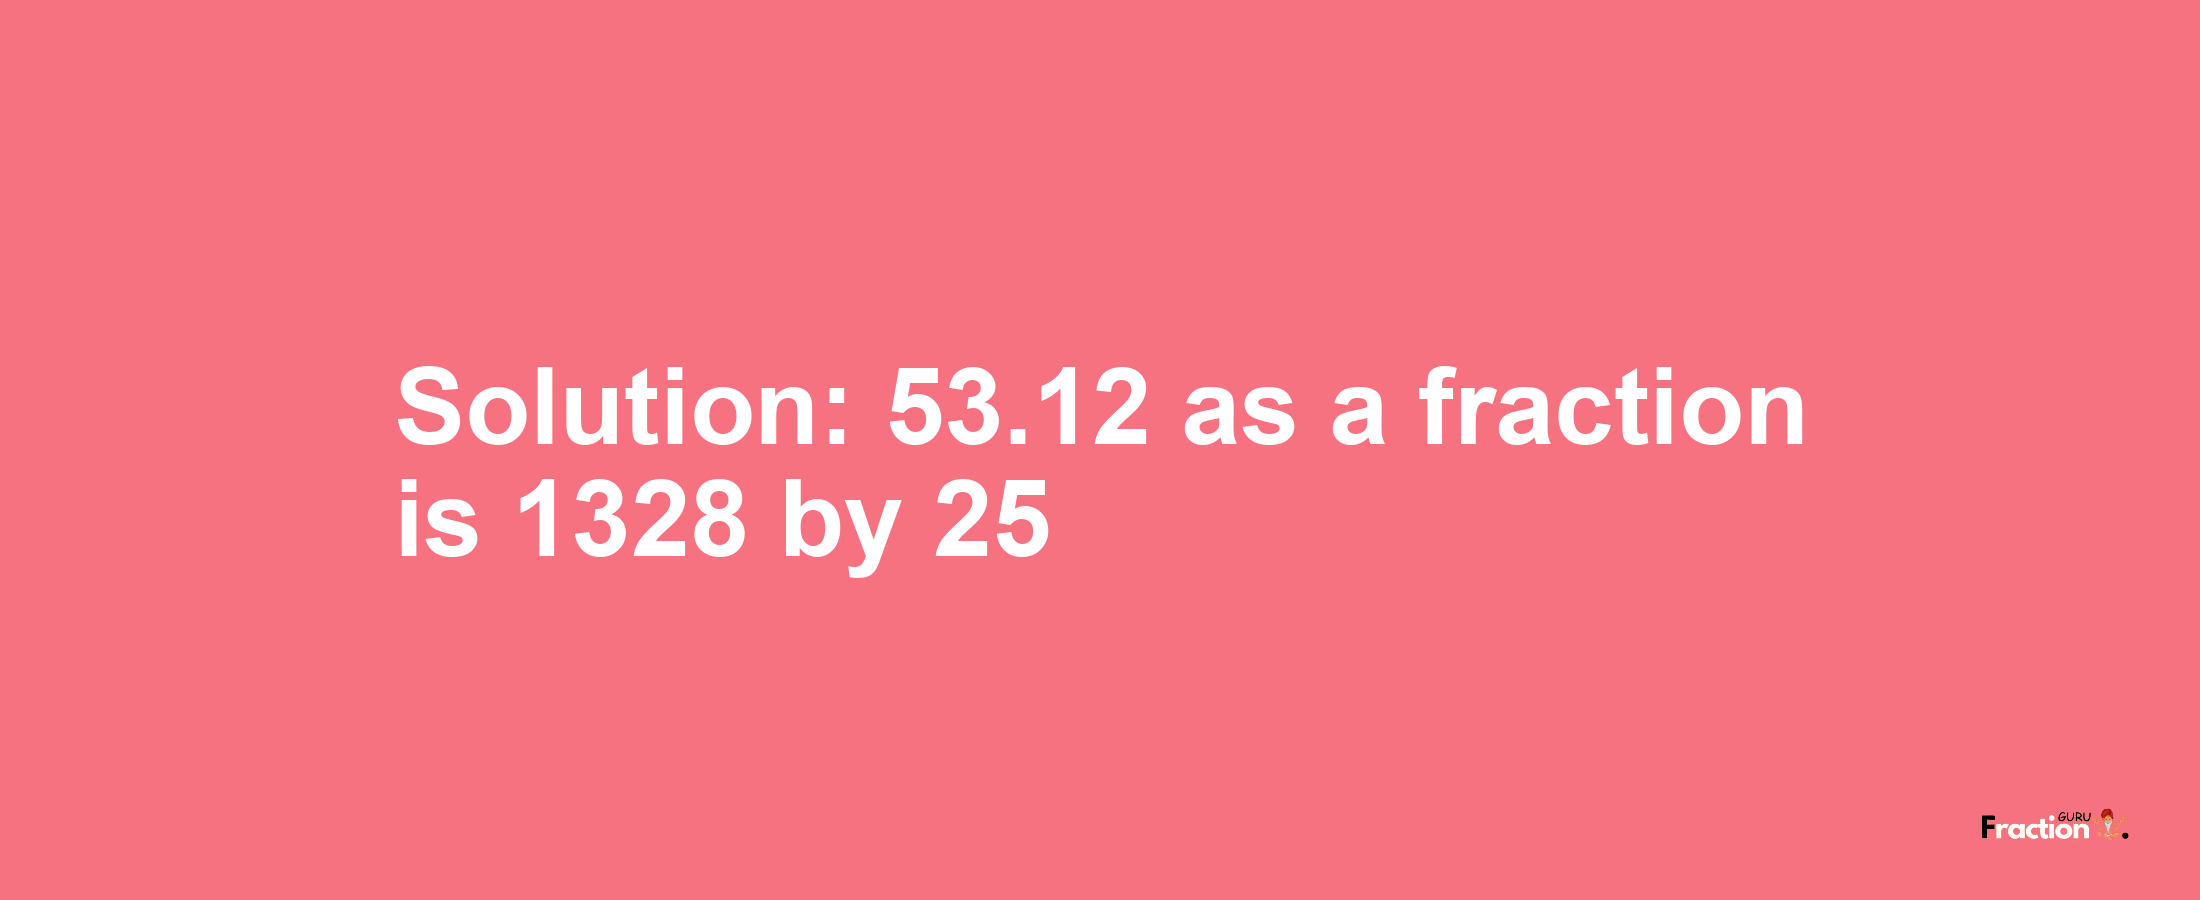 Solution:53.12 as a fraction is 1328/25